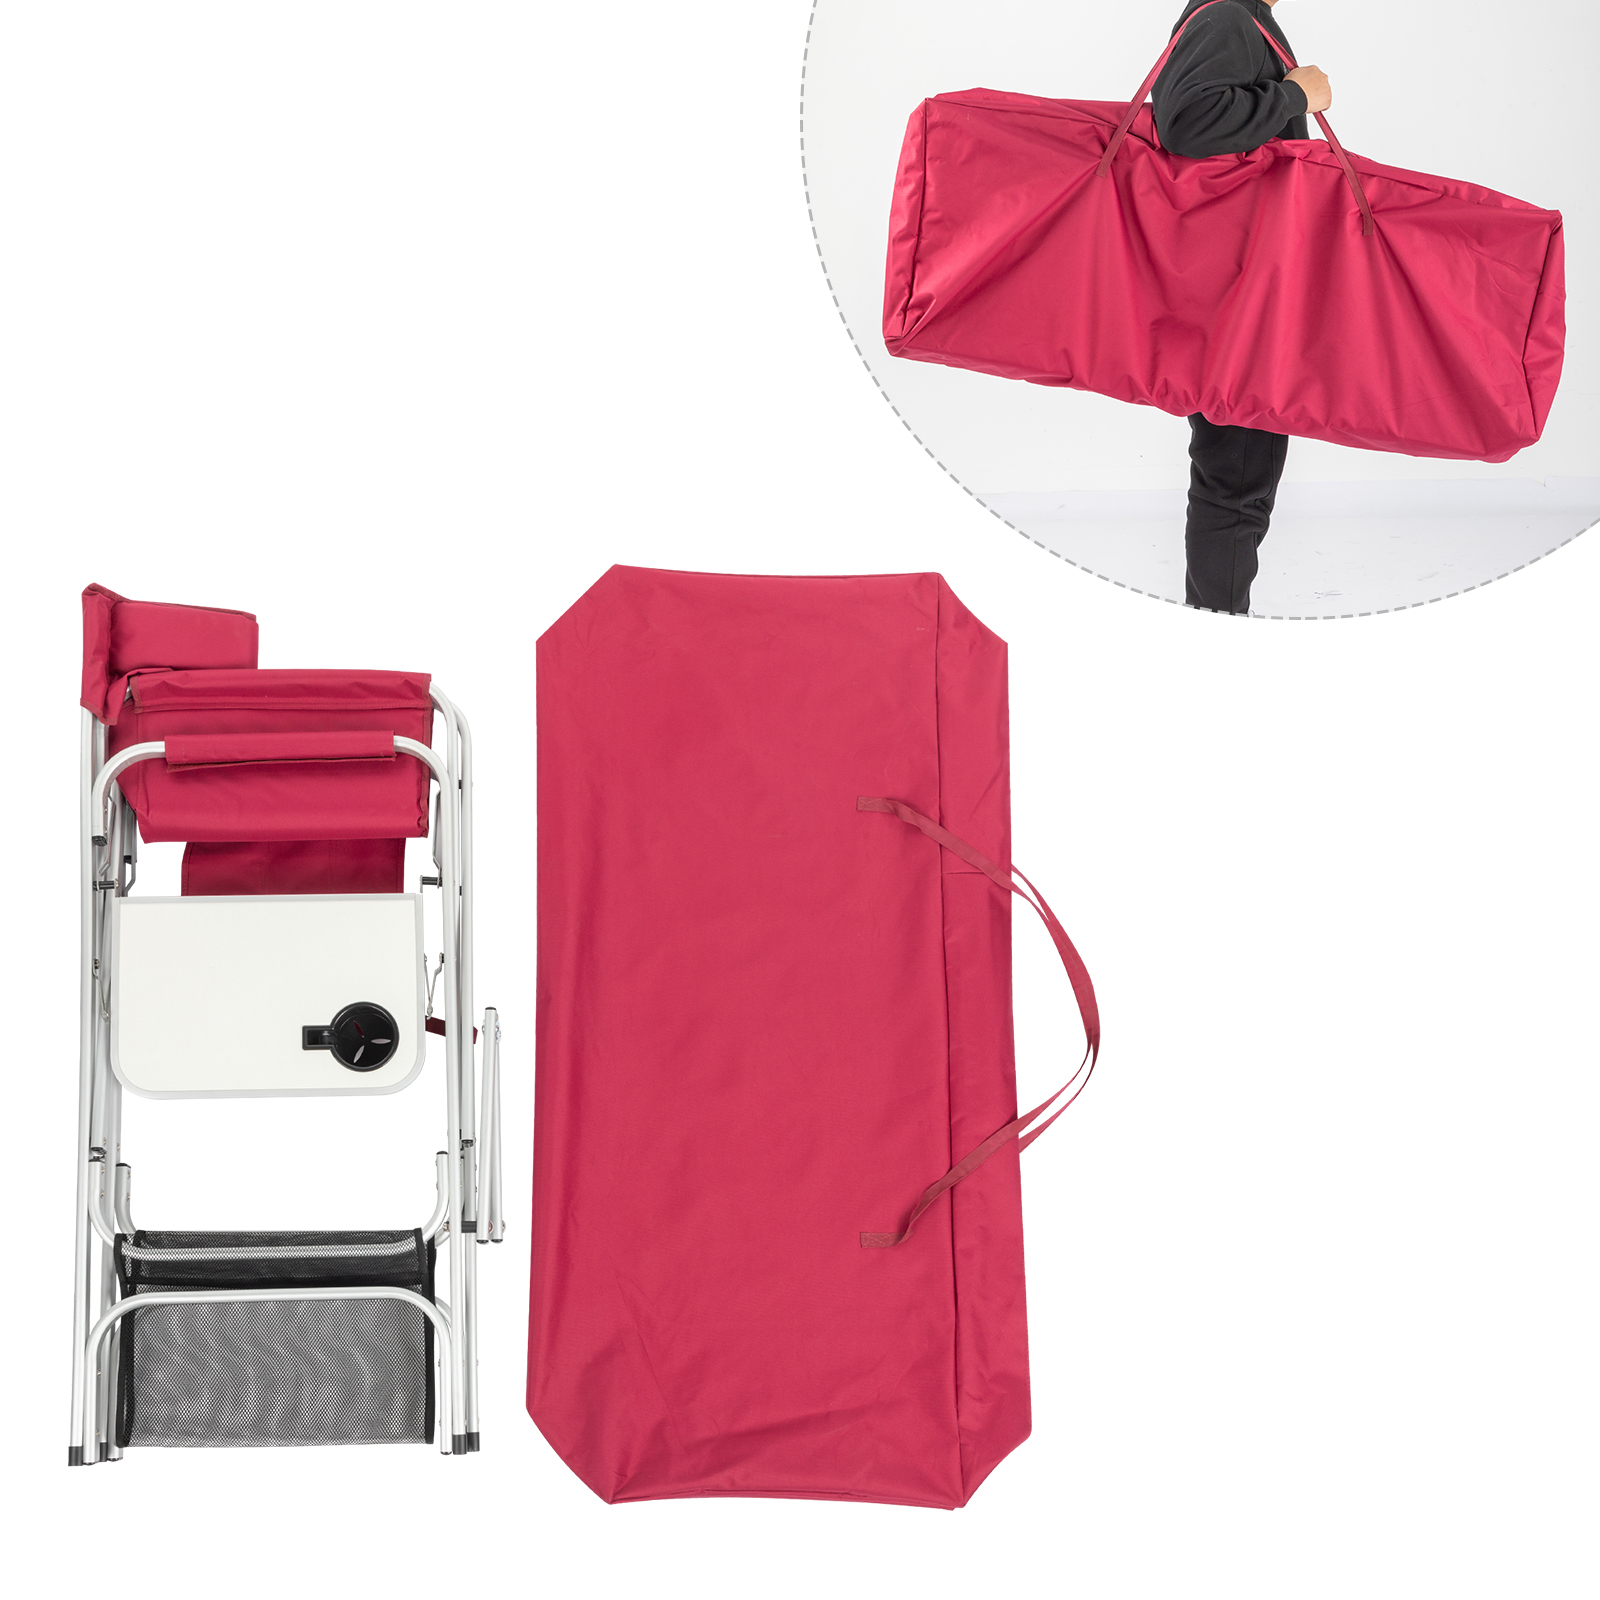 GoDecor Director Chair Oversize Padded Seat Camping Chair with Side Table Red - image 4 of 7